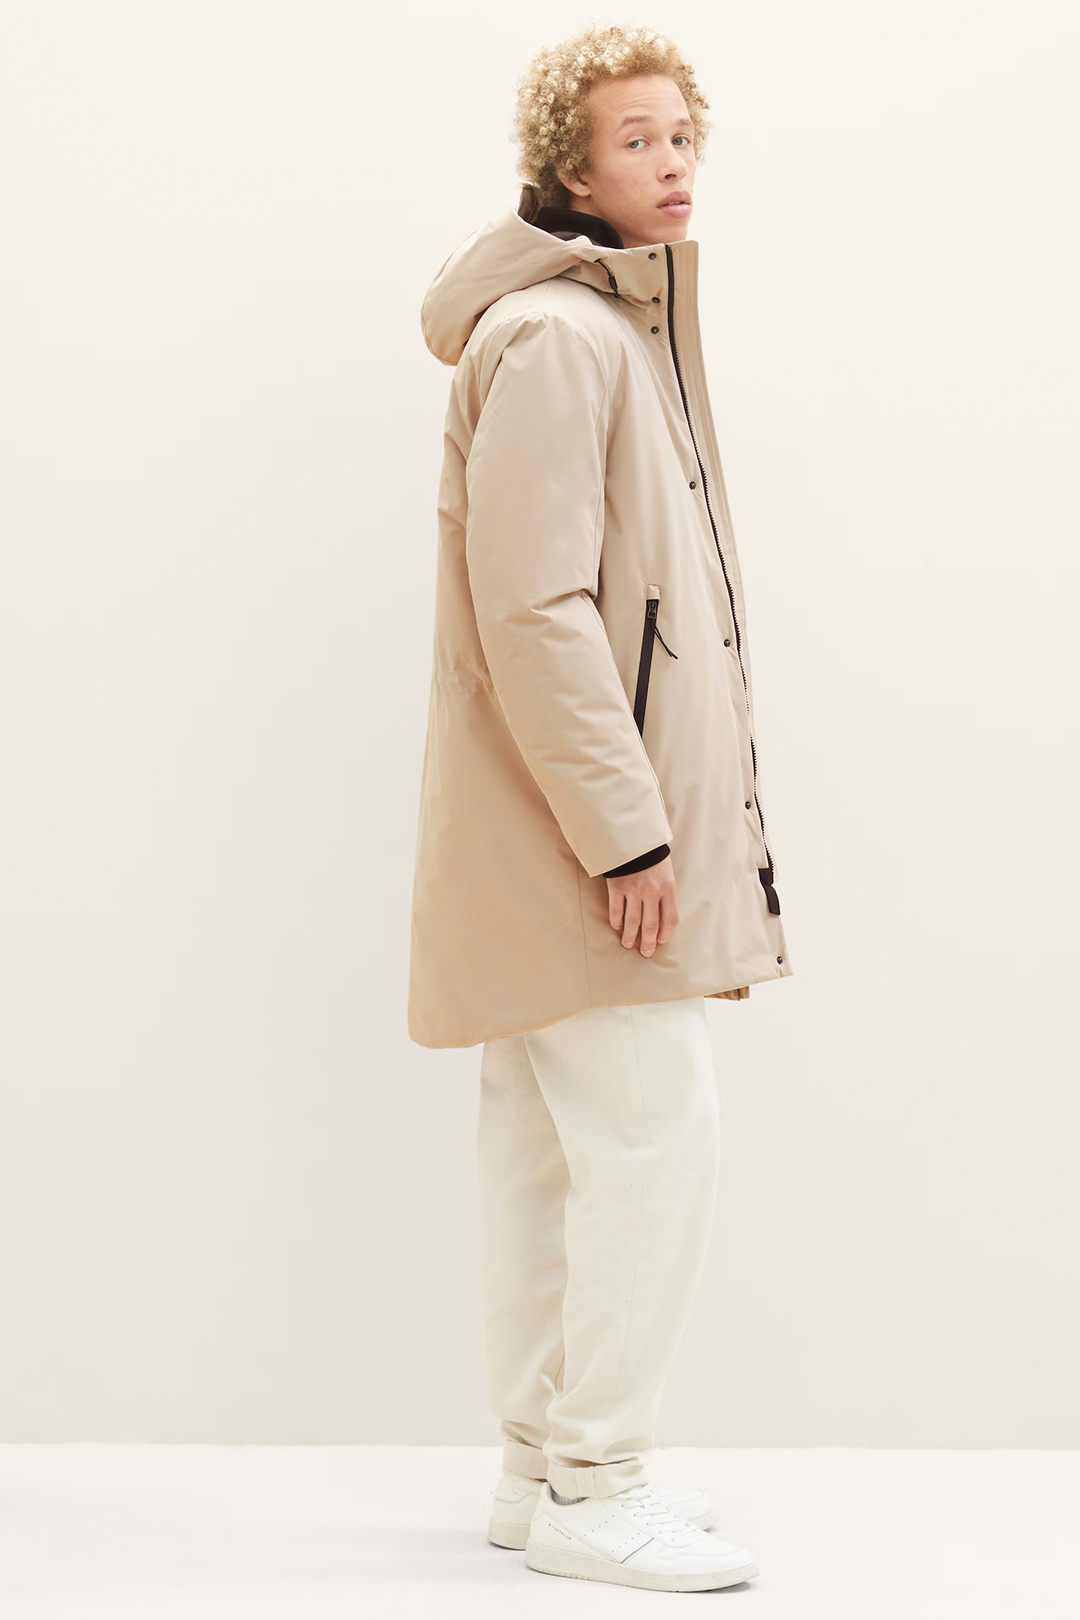 Beige hooded parka, cream off white pants, and white sneakers outfit